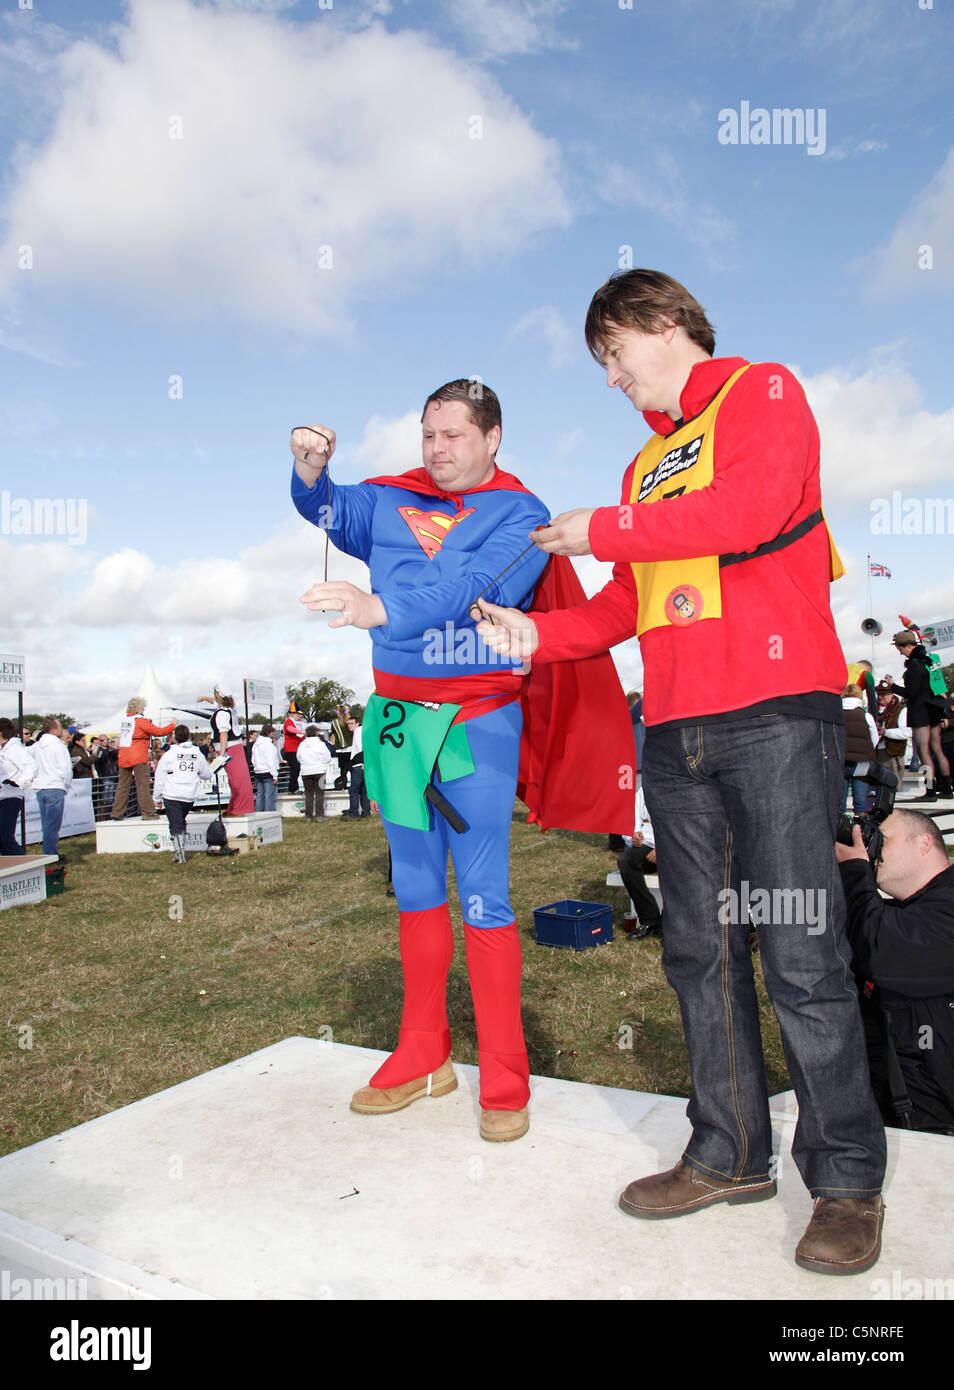 Two men, one dressed as Superman, playing conkers at the World Conker Championships held at Oundle,Northamptonshire Stock Photo